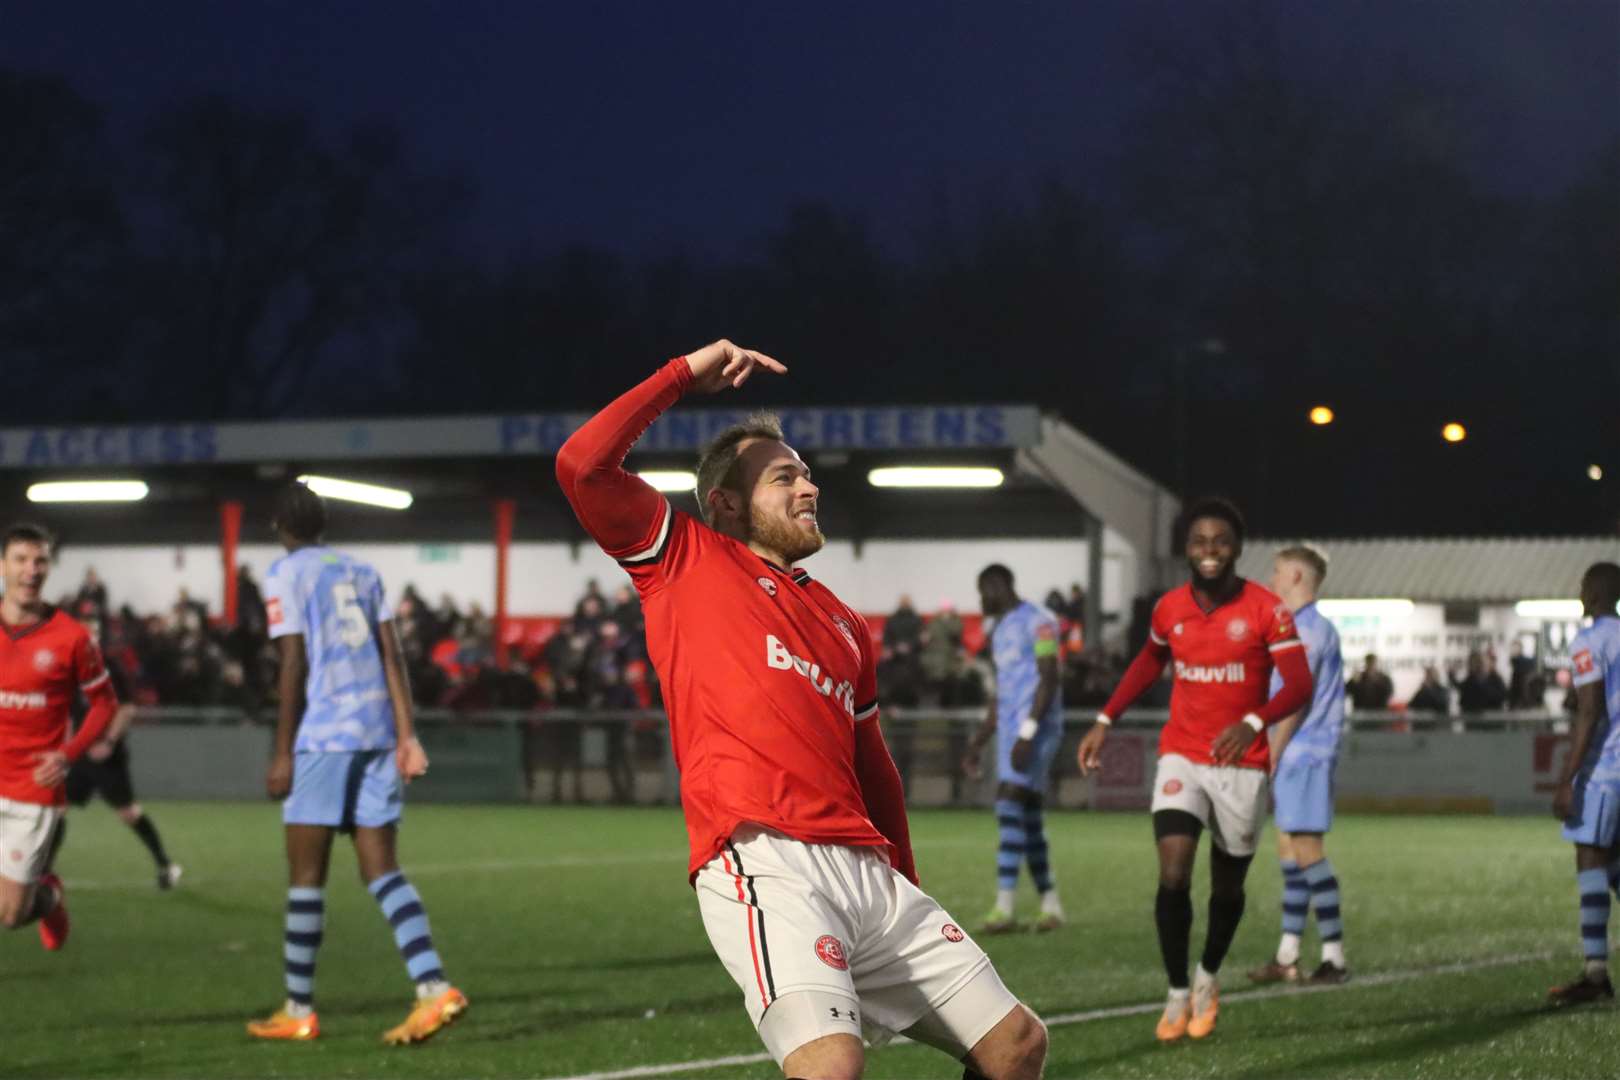 Reece Butler celebrates his goal in Chatham Town’s 3-2 win against Cheshunt Picture: Max English (@max_ePhotos)